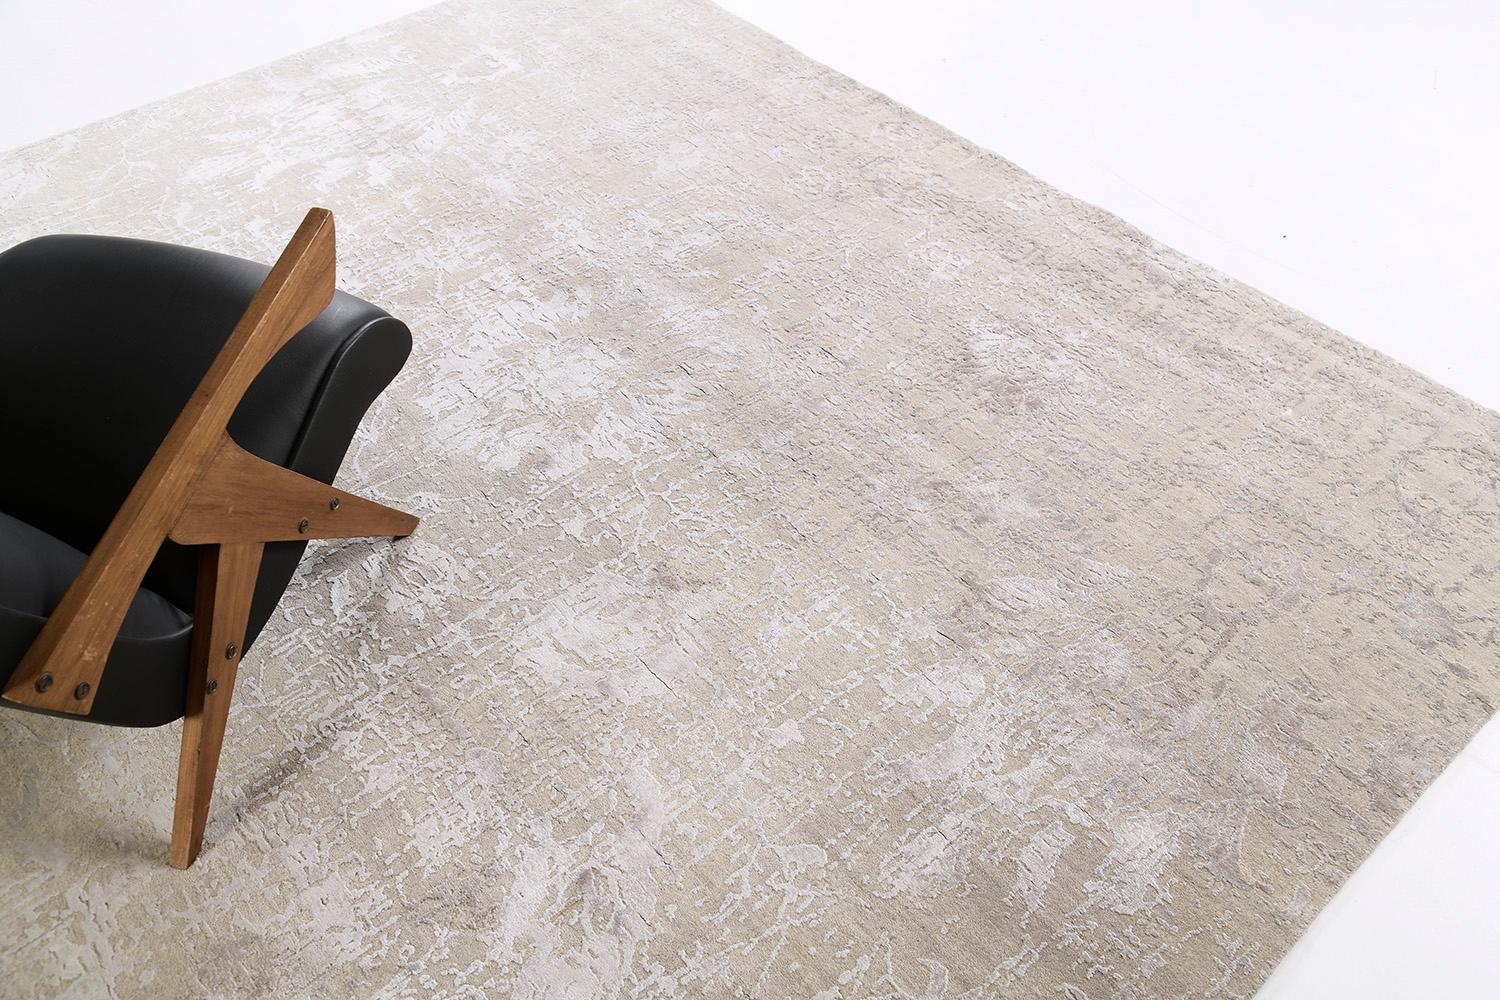 Mezzo Carino is a wool and silk rug in transitional abstract of definitive flowers and vines over amazing tones of white and soft dusty sage. A masterpiece that balances the luxurious quality with contemporary and modern spaces. An eye-catcher that